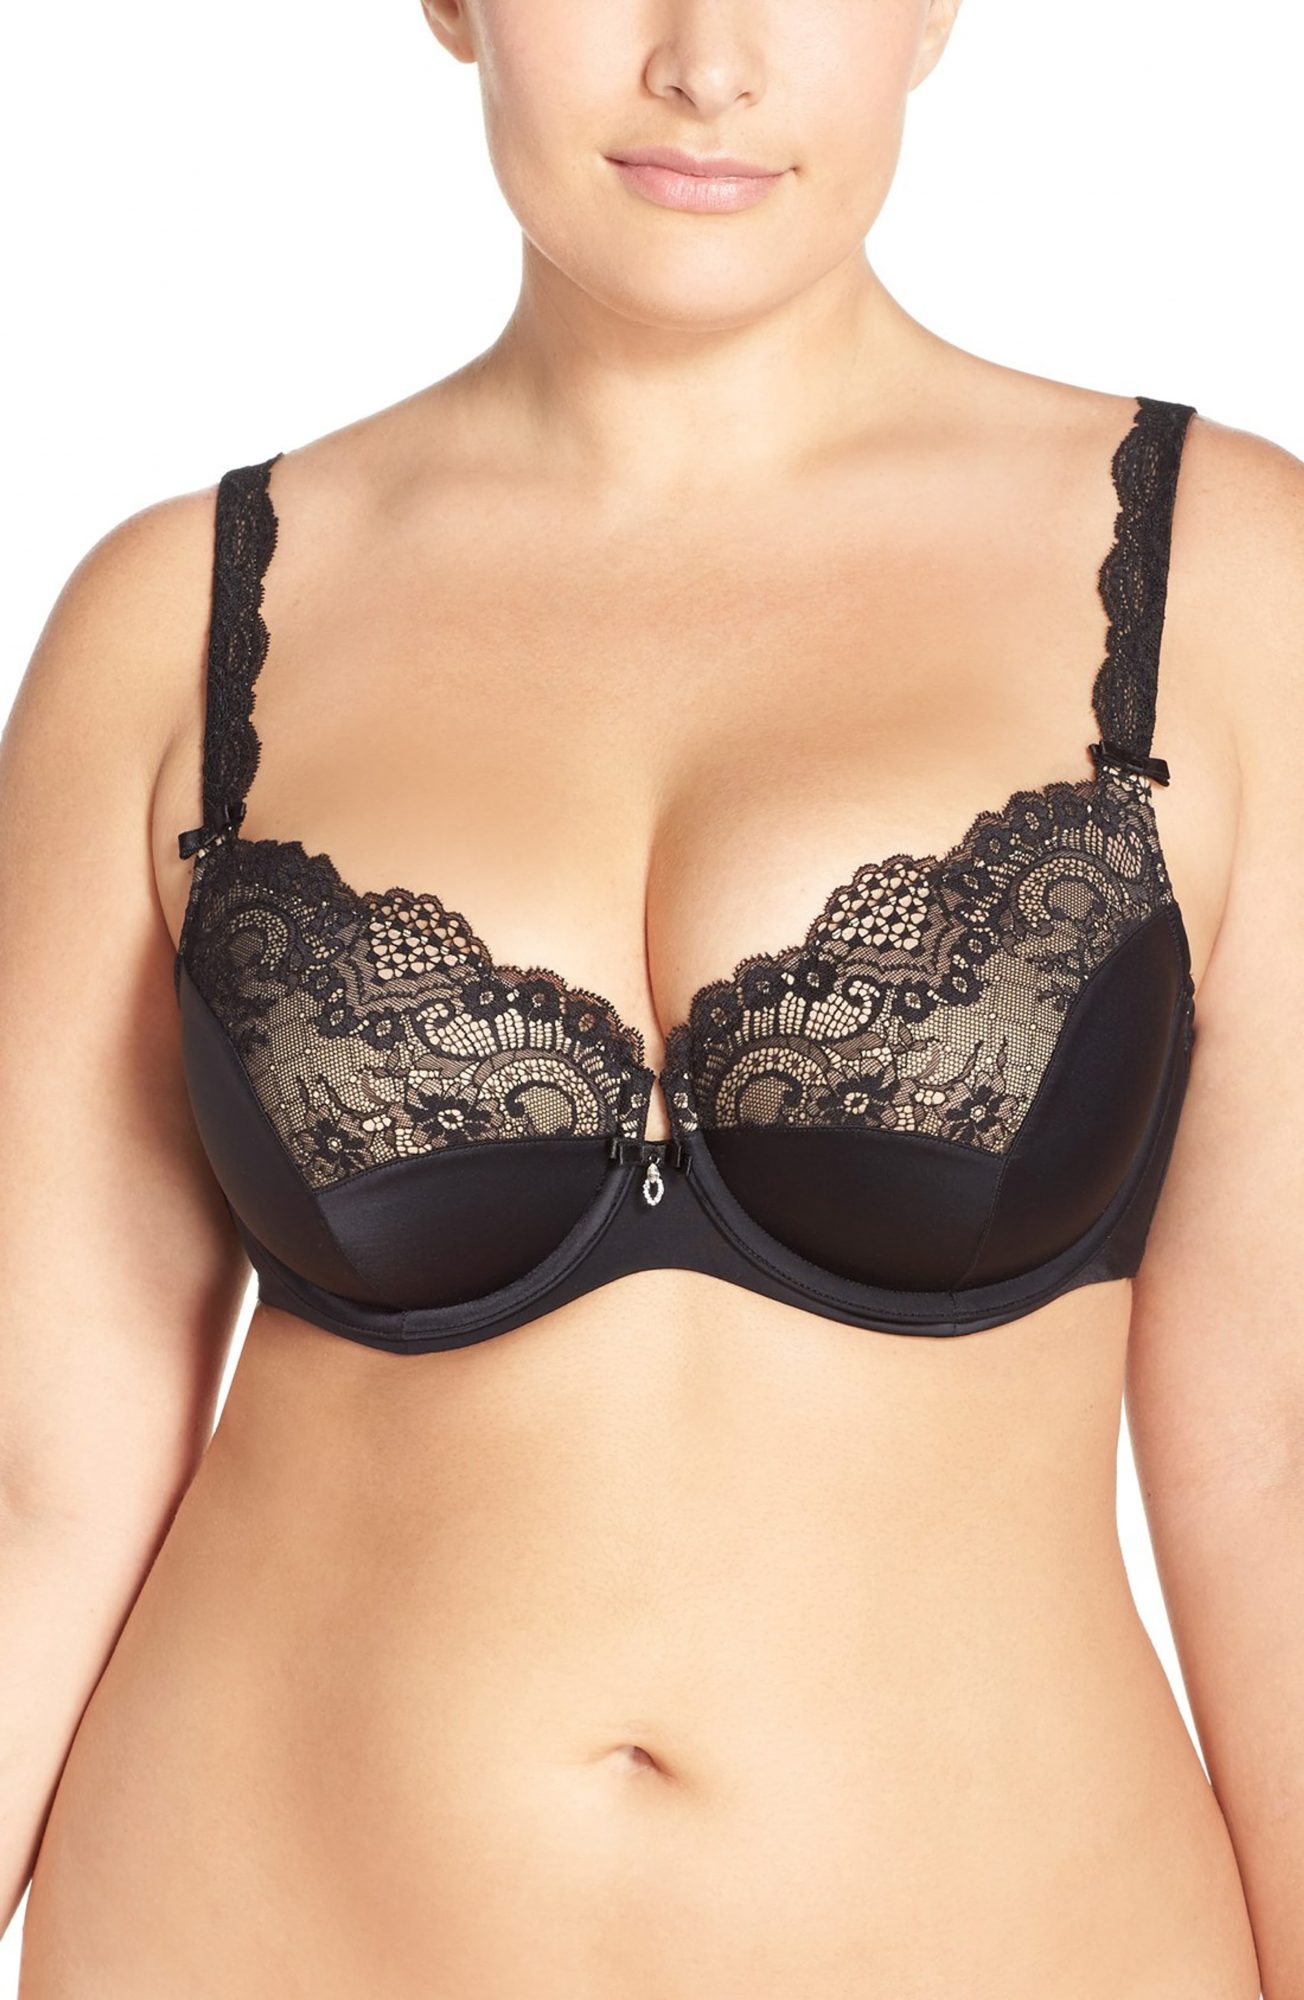 Plus-Size Lingerie - Embed